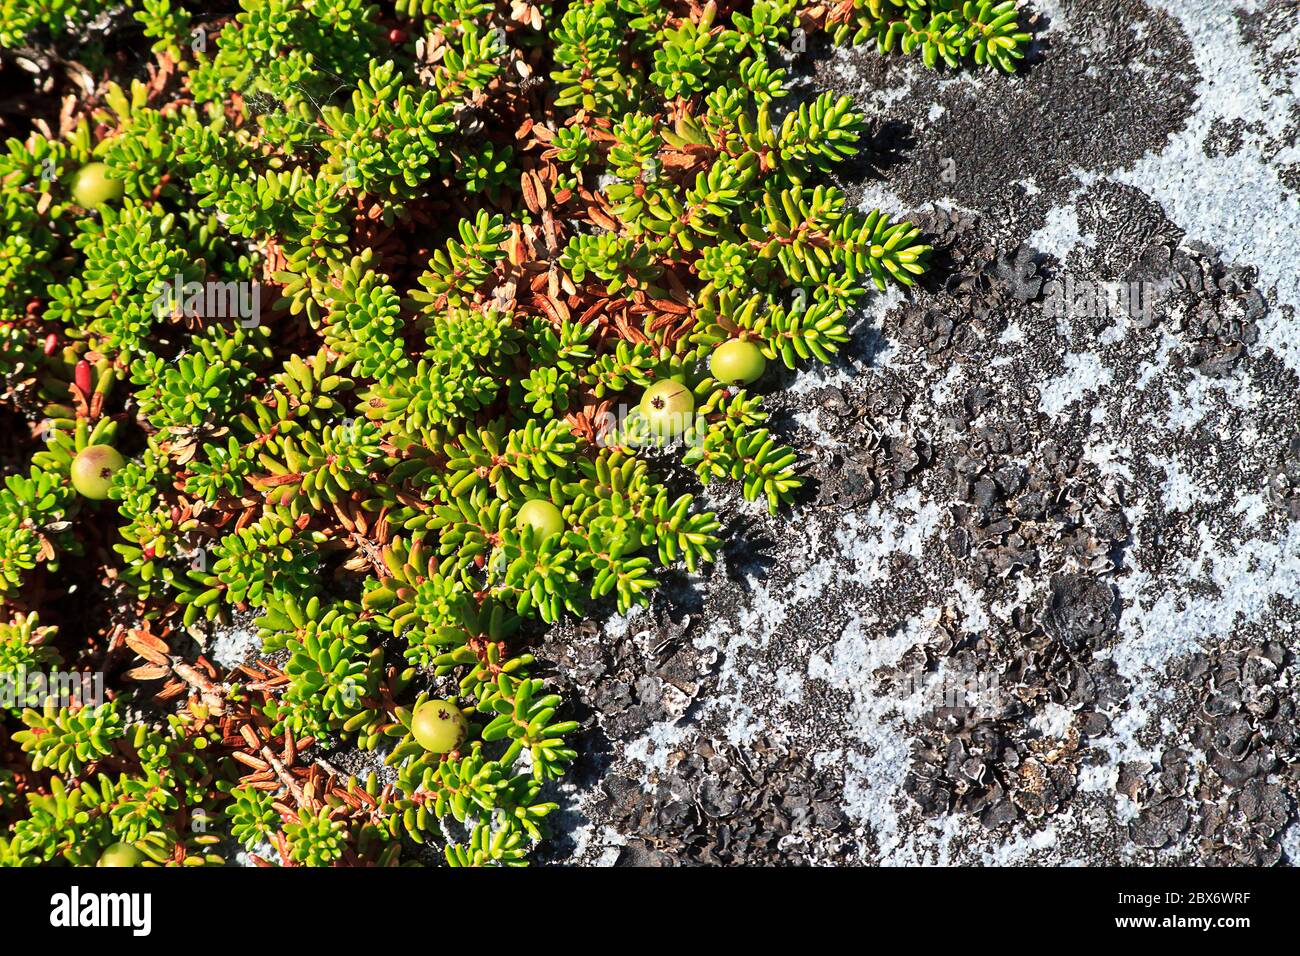 Crowberry (Empetrum nigrum) growing in the tundra of Canada. Tiny green crowberries can be seen on the plants. Stock Photo